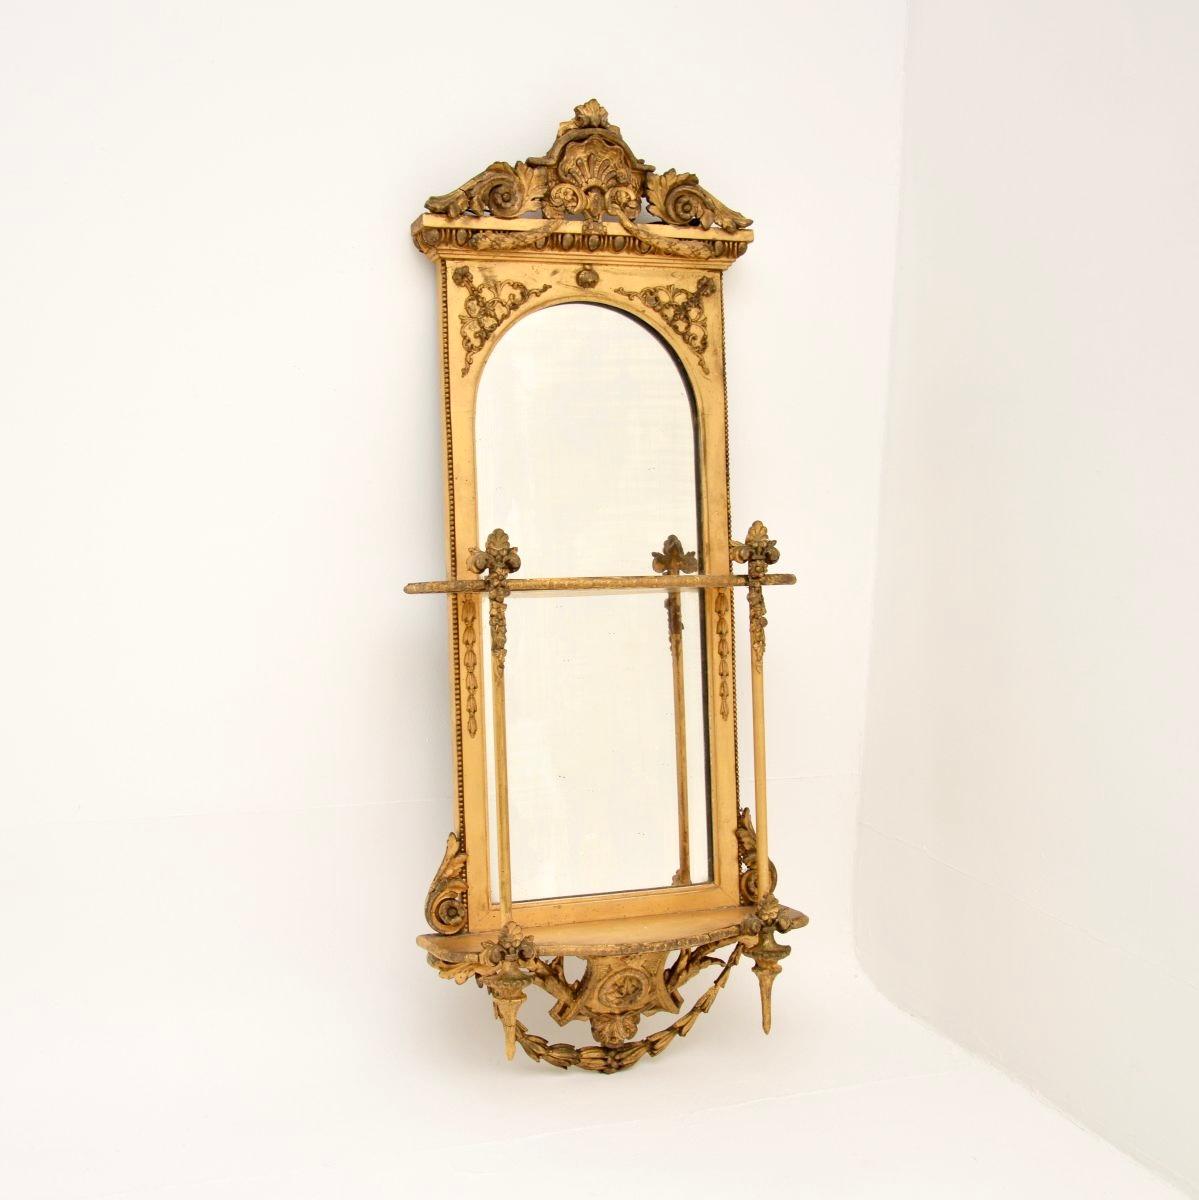 An absolutely stunning antique Victorian period gilt wood mirror. This was made in England, it dates from around the 1840-1850 period.

It is of incredibly fine quality, it is nice and slim with two built in shelves. There are lots of fine details